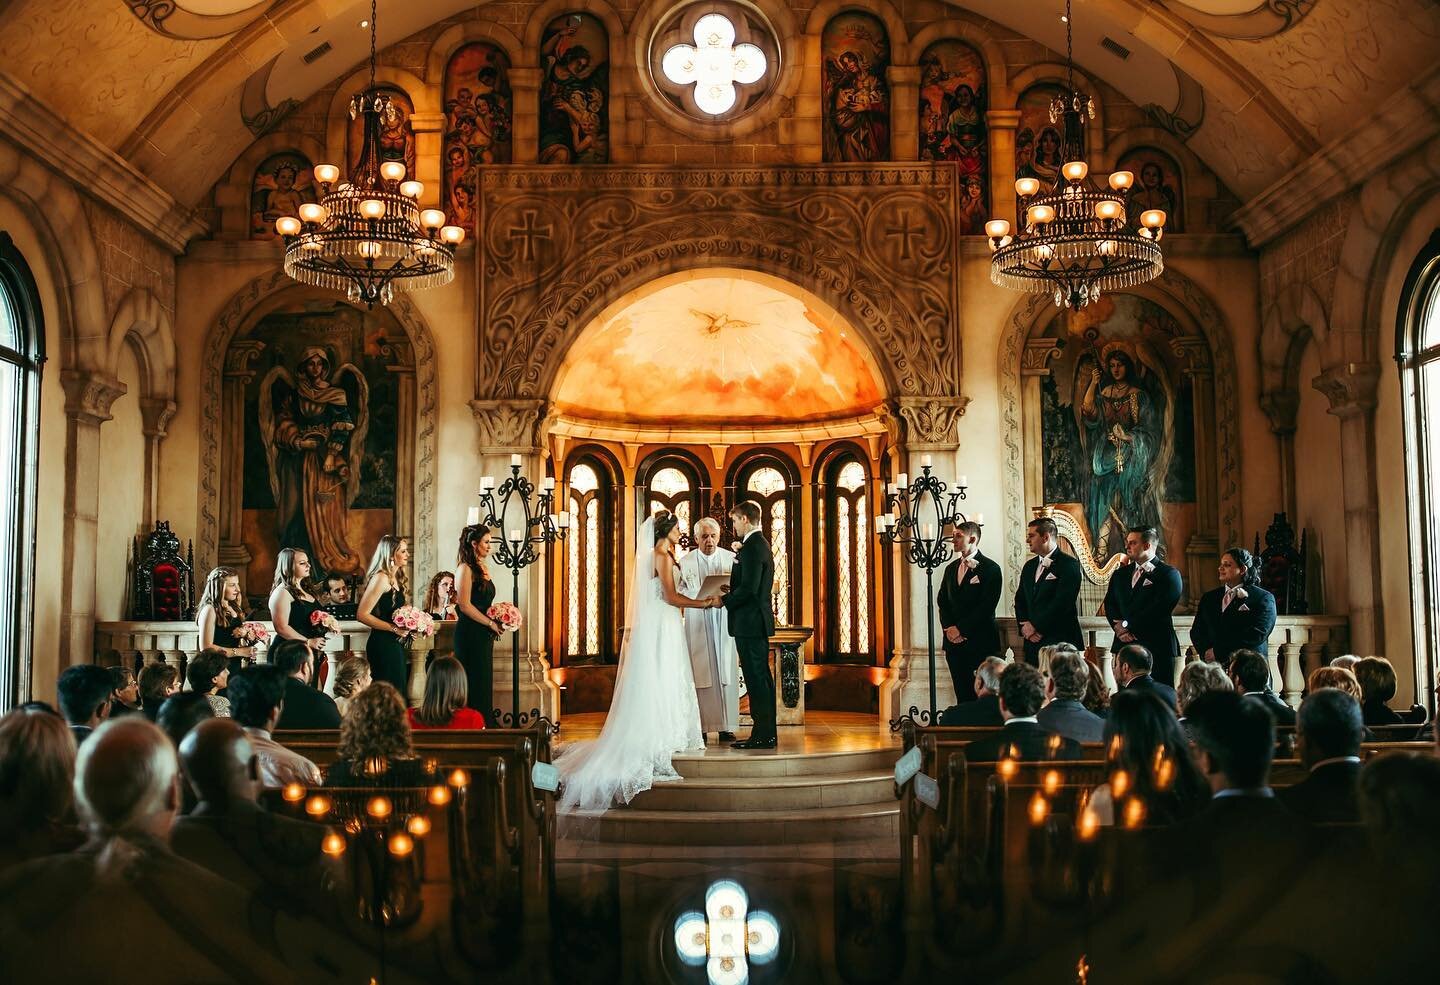 Want to get married in the most beautiful chapel in Italy? 
All you have to do is take a short drive to Mckinney &hearts;️
.
.
.
.

#theolana #theolanawedding #dallasweddingplanner #dallasweddingphotographer #dallasweddingvideographer #dallasweddingv